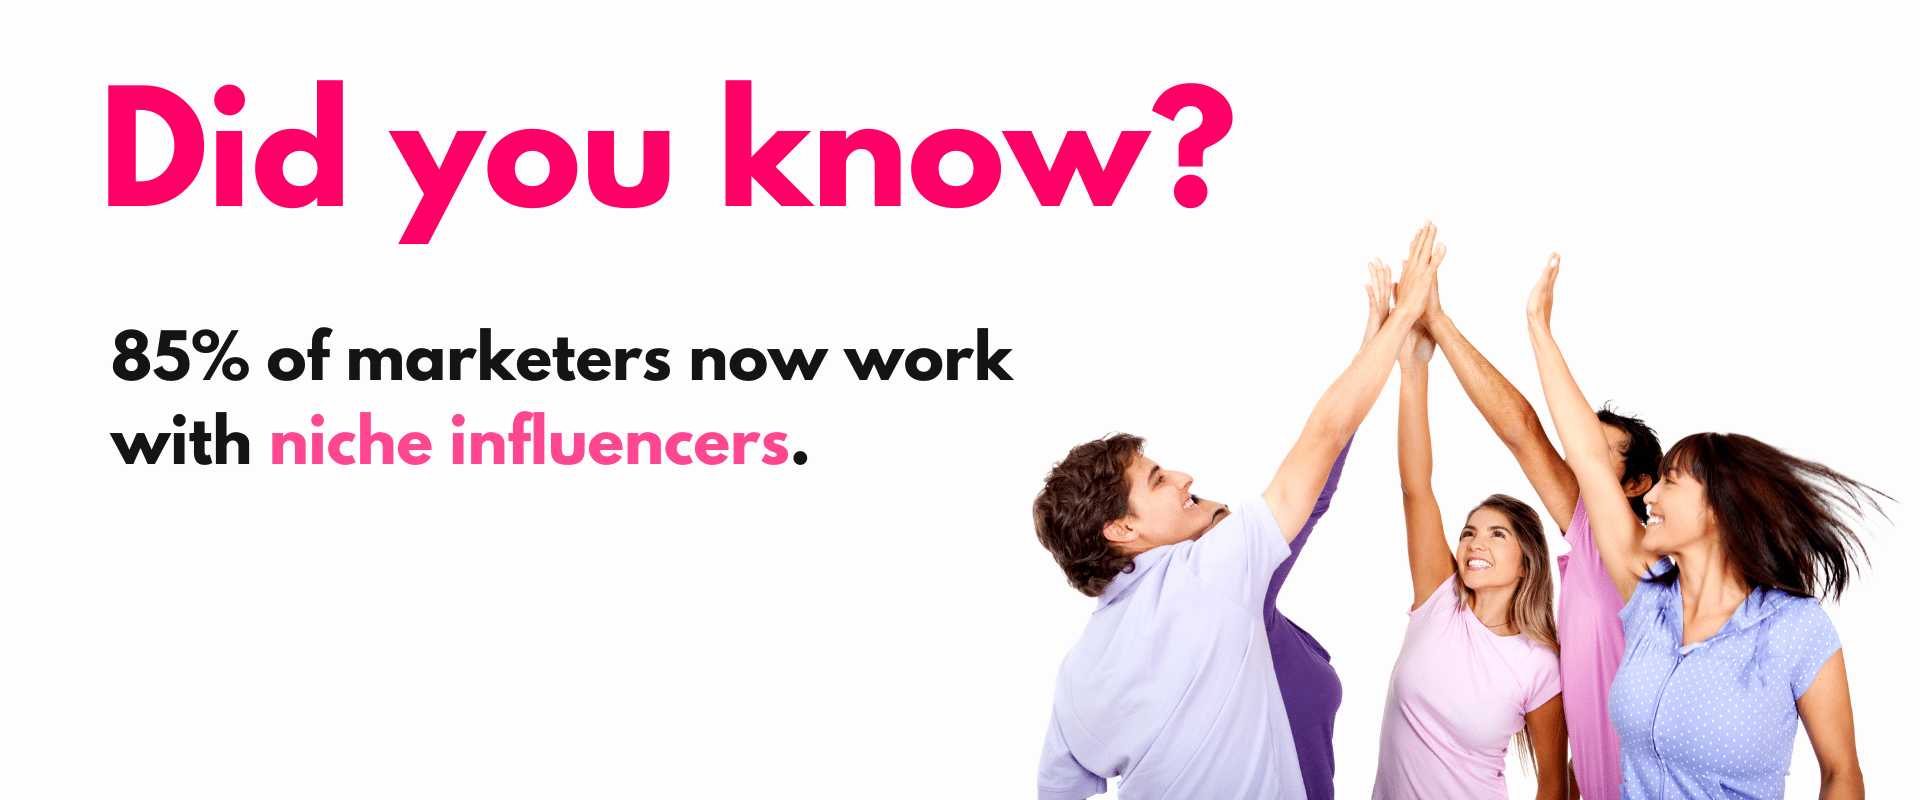 Did you know? 85% of marketers now work with influencers.